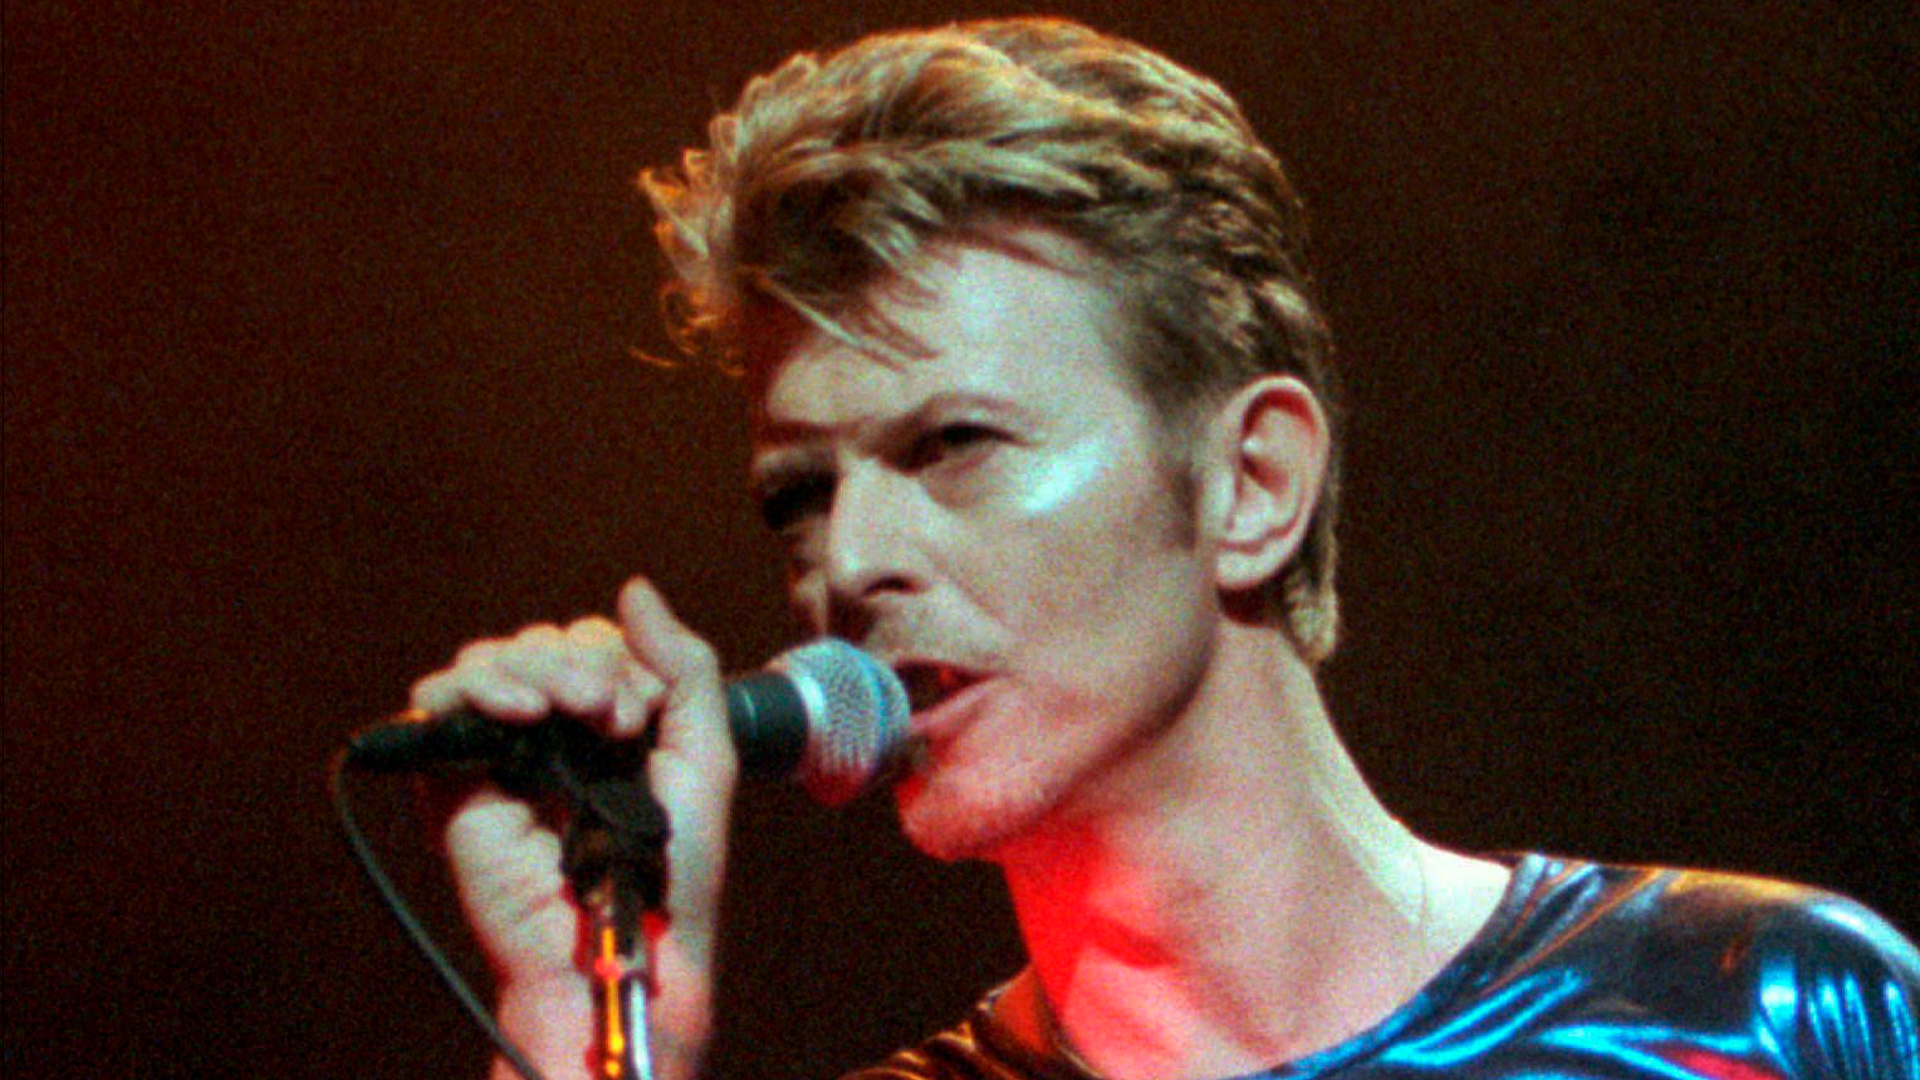 David Bowie's back catalogue sold in deal worth 'hundreds of 